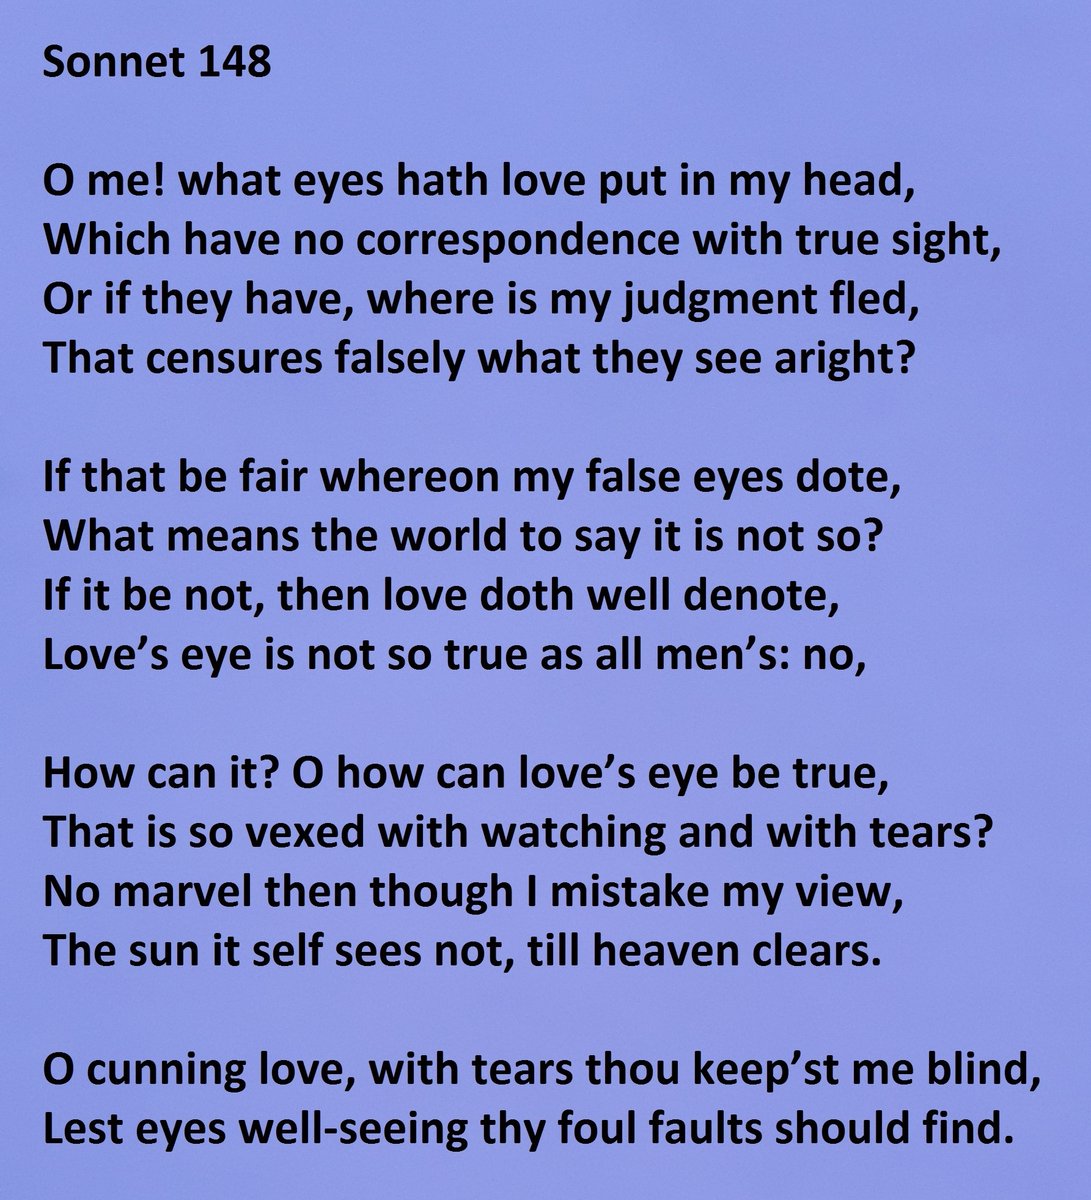 Sonnet 148 by William Shakespeare - "O me! what eyes hath love put in my head"